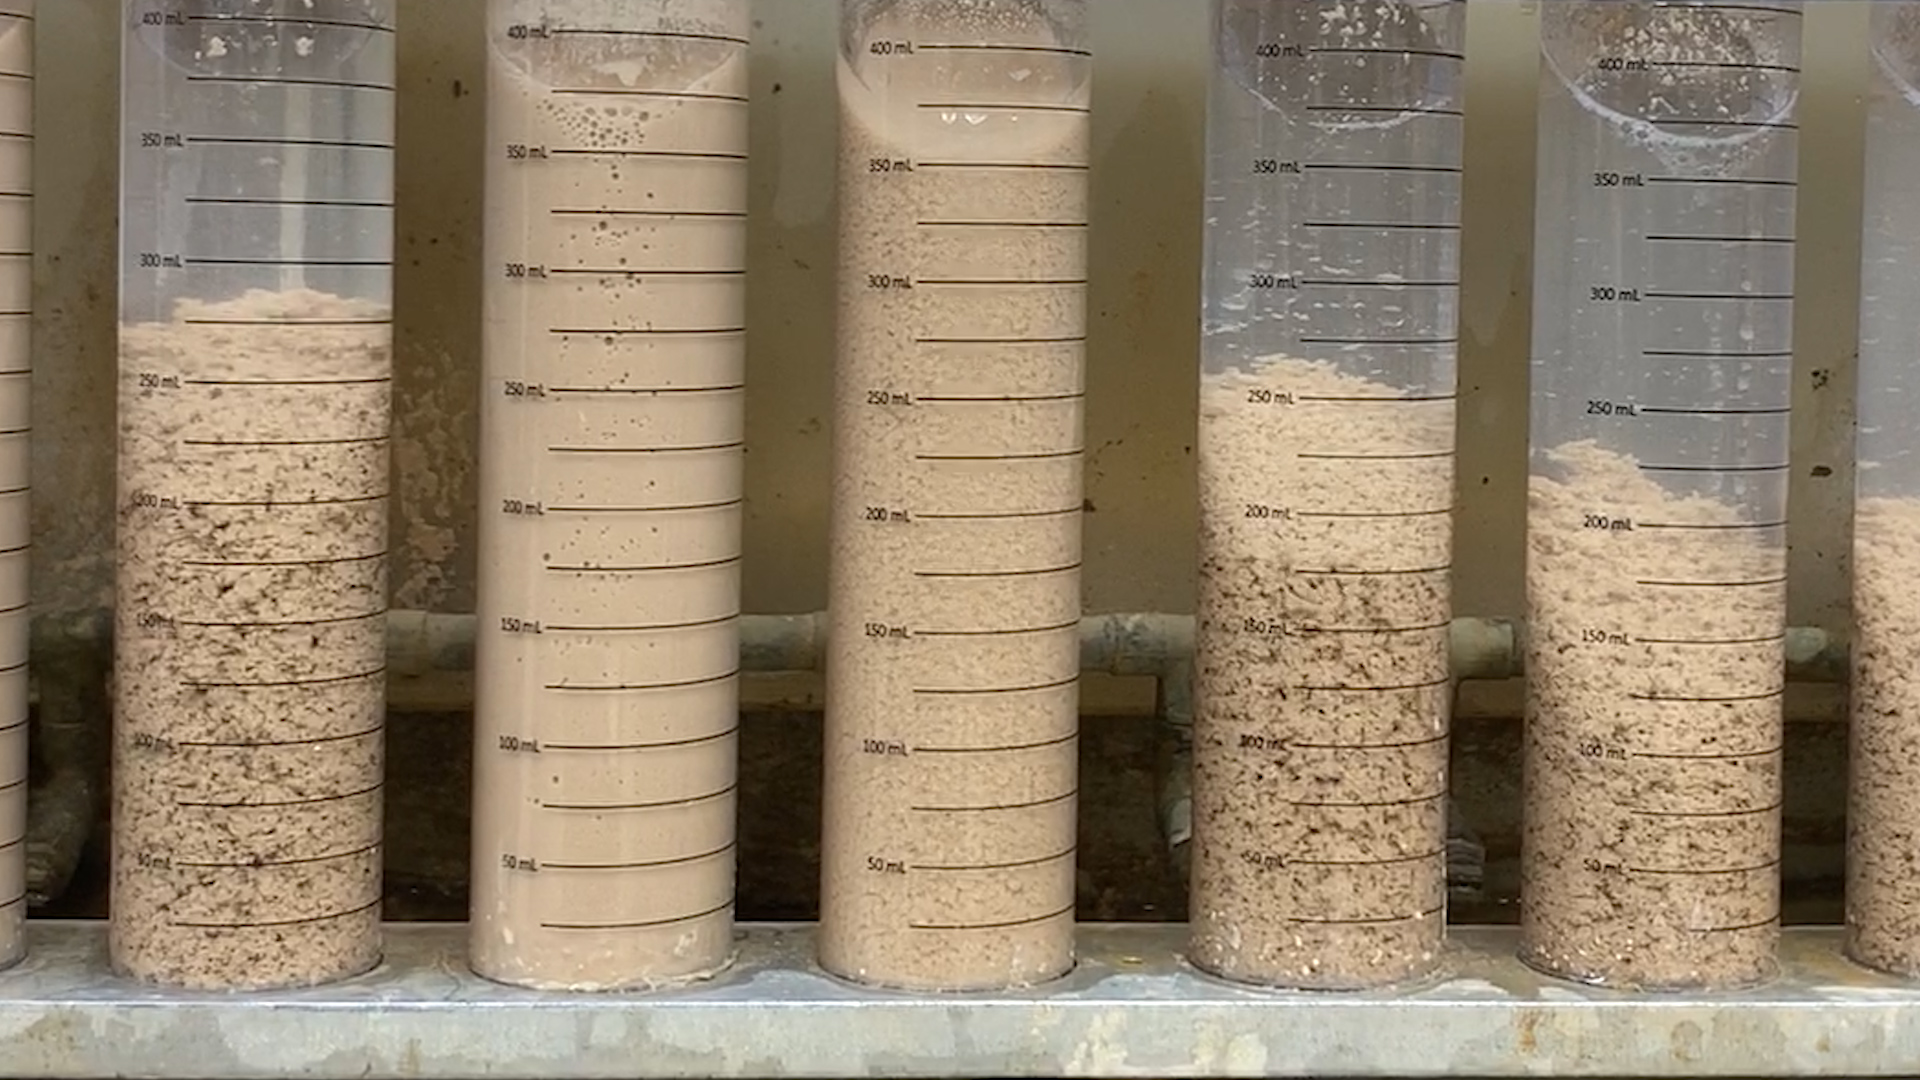 Multiple test tubes with wastewater showing how the sediment reacts to polymer flocculants and settles to the bottom of the tubes.